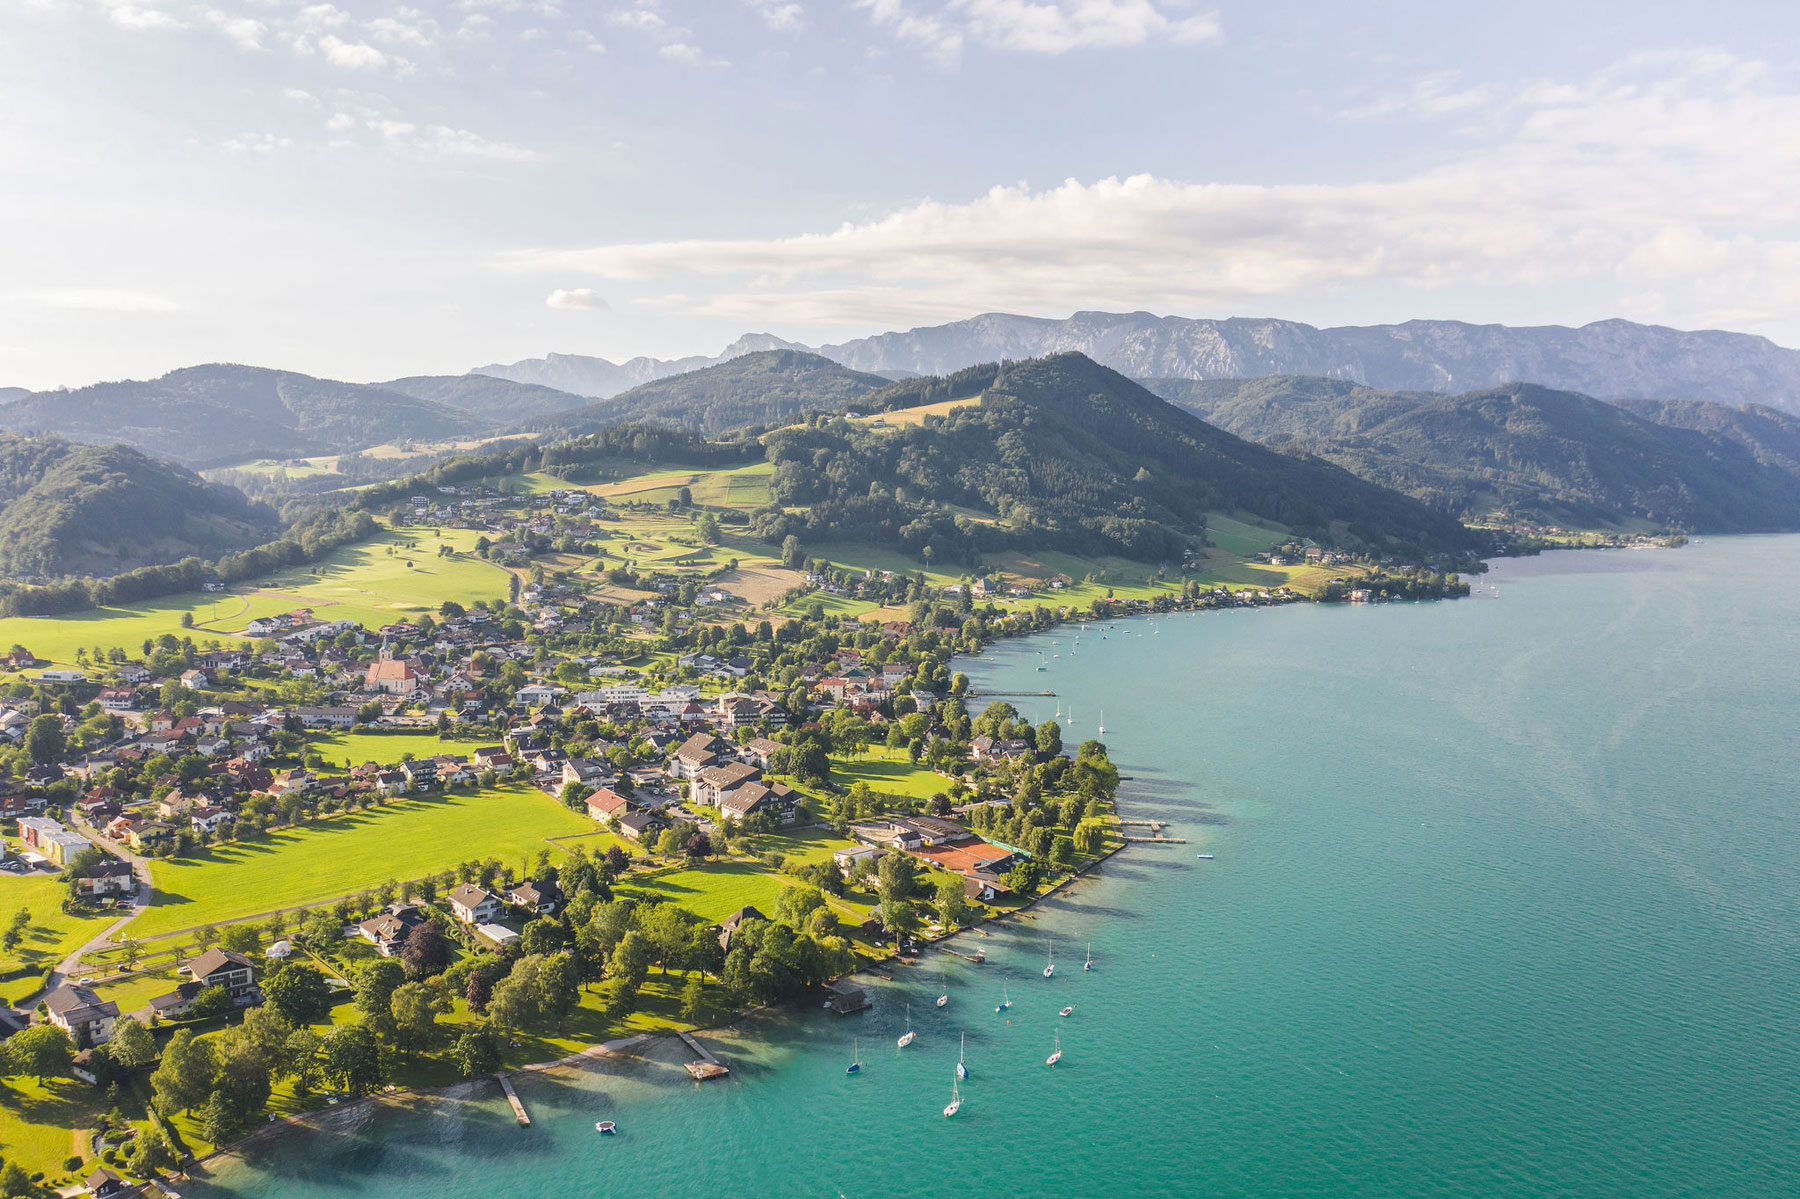 Weyregg on the Attersee Â© TVB Attersee Attergau. Ph.Credit Moritz Ablinger